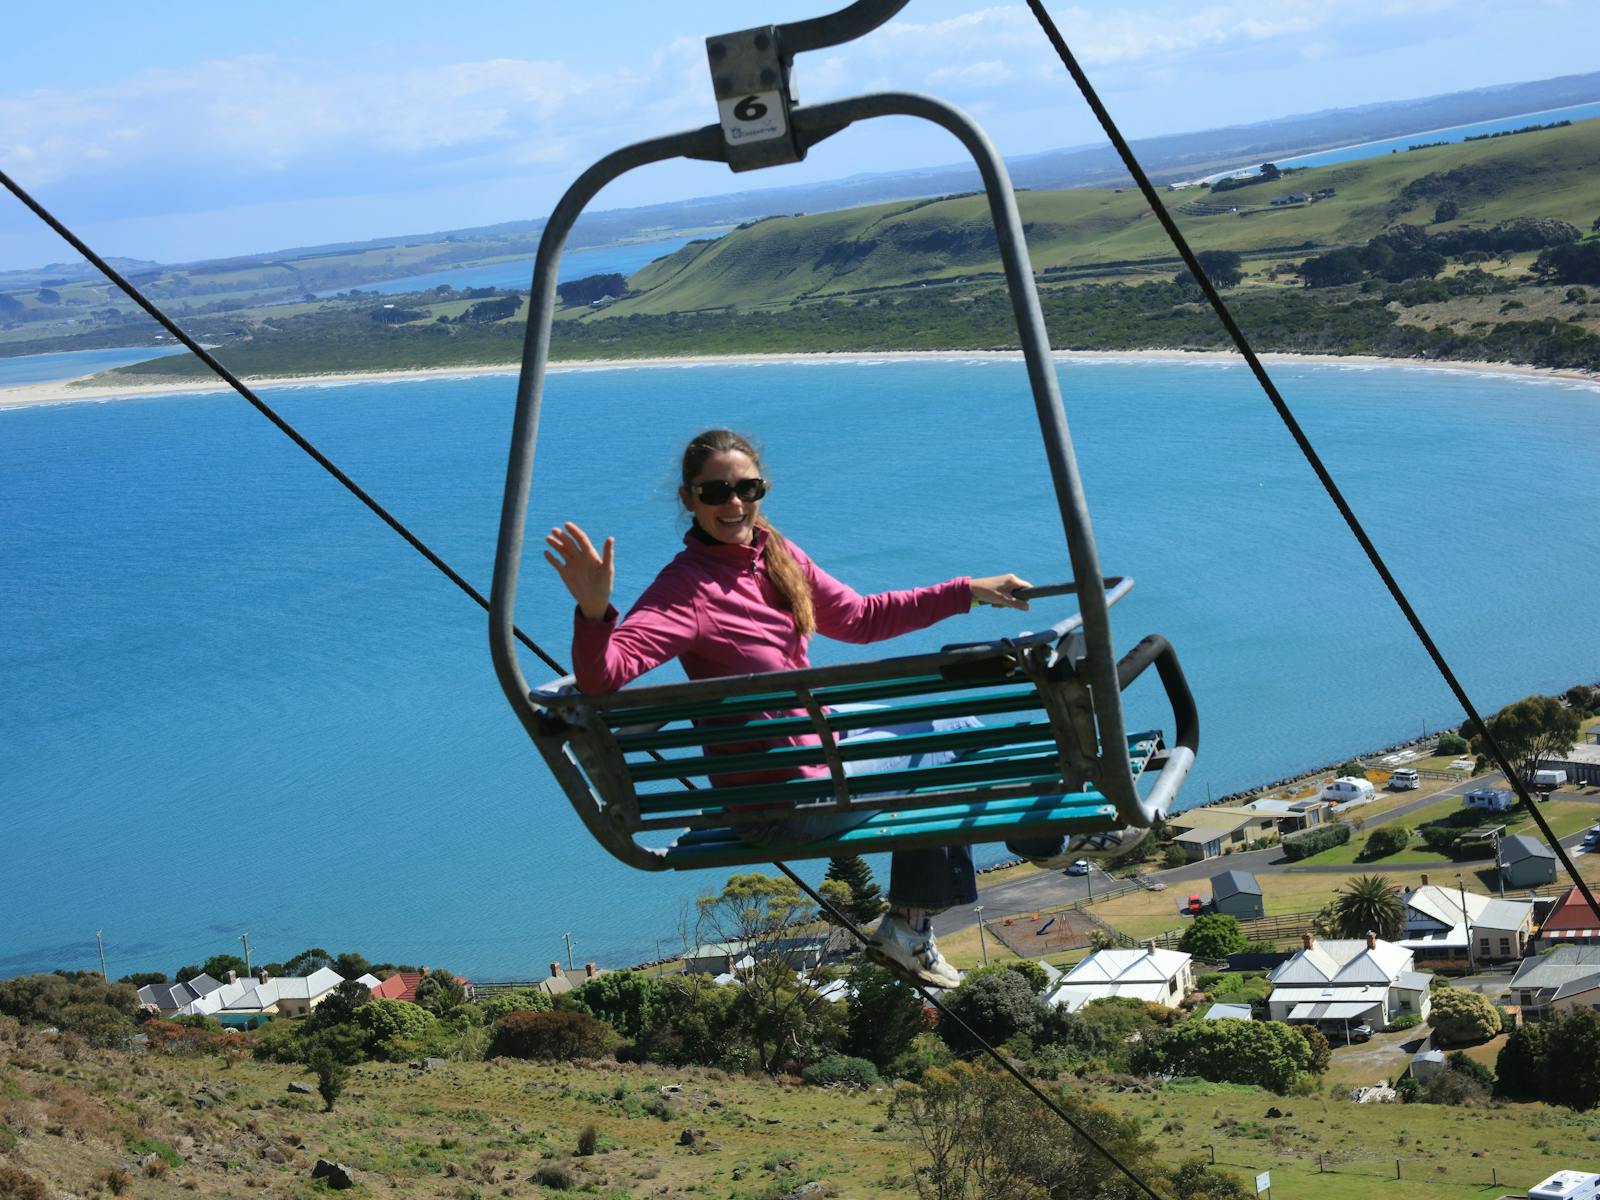 The Nut Chairlift